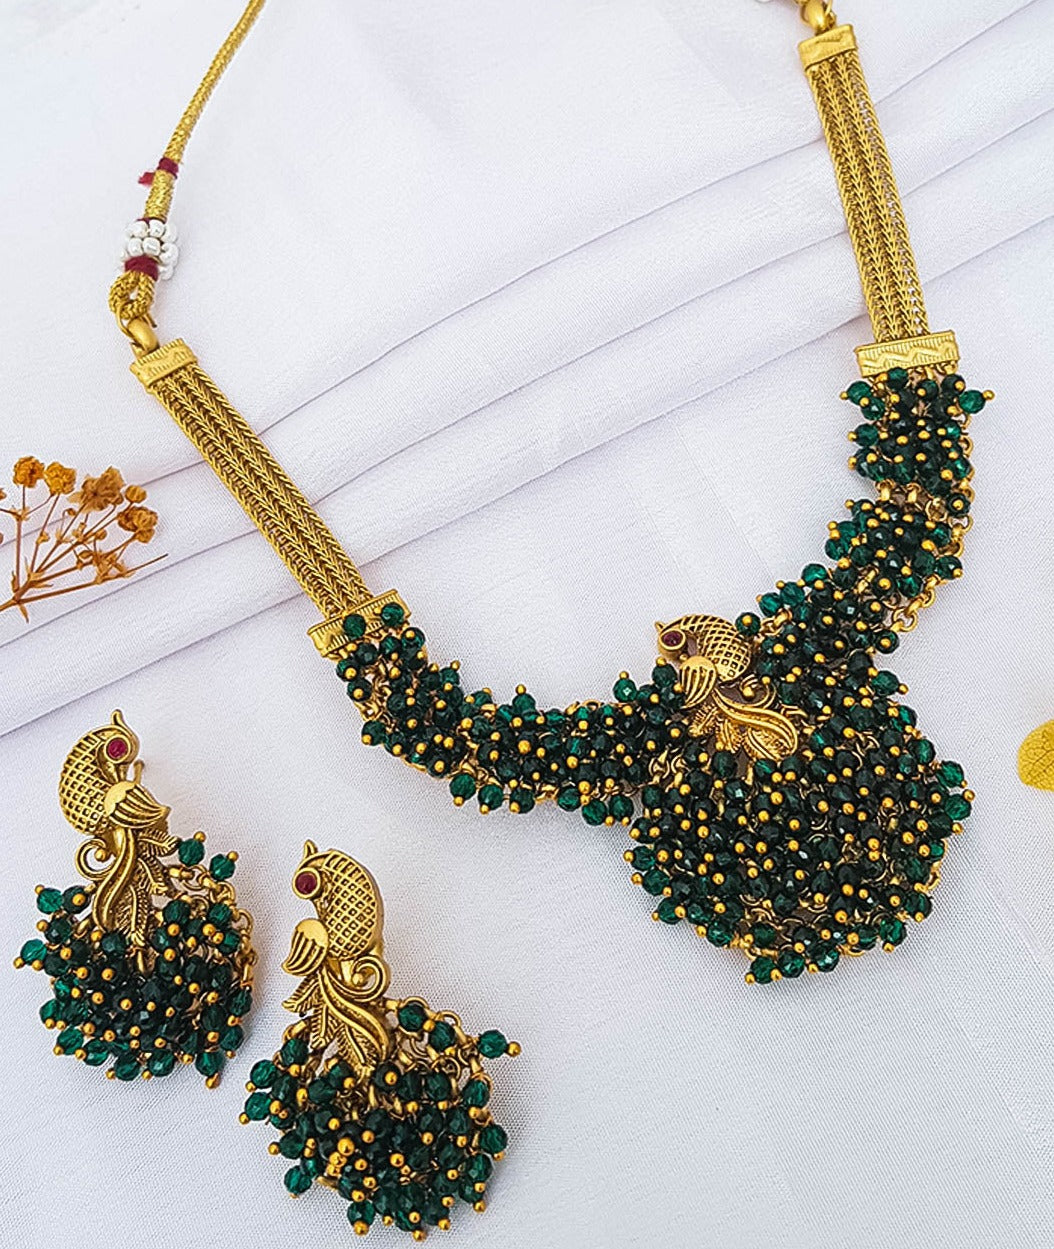 Premium Gold Finish Designer Peacock Necklace with Crystal drops 12501N